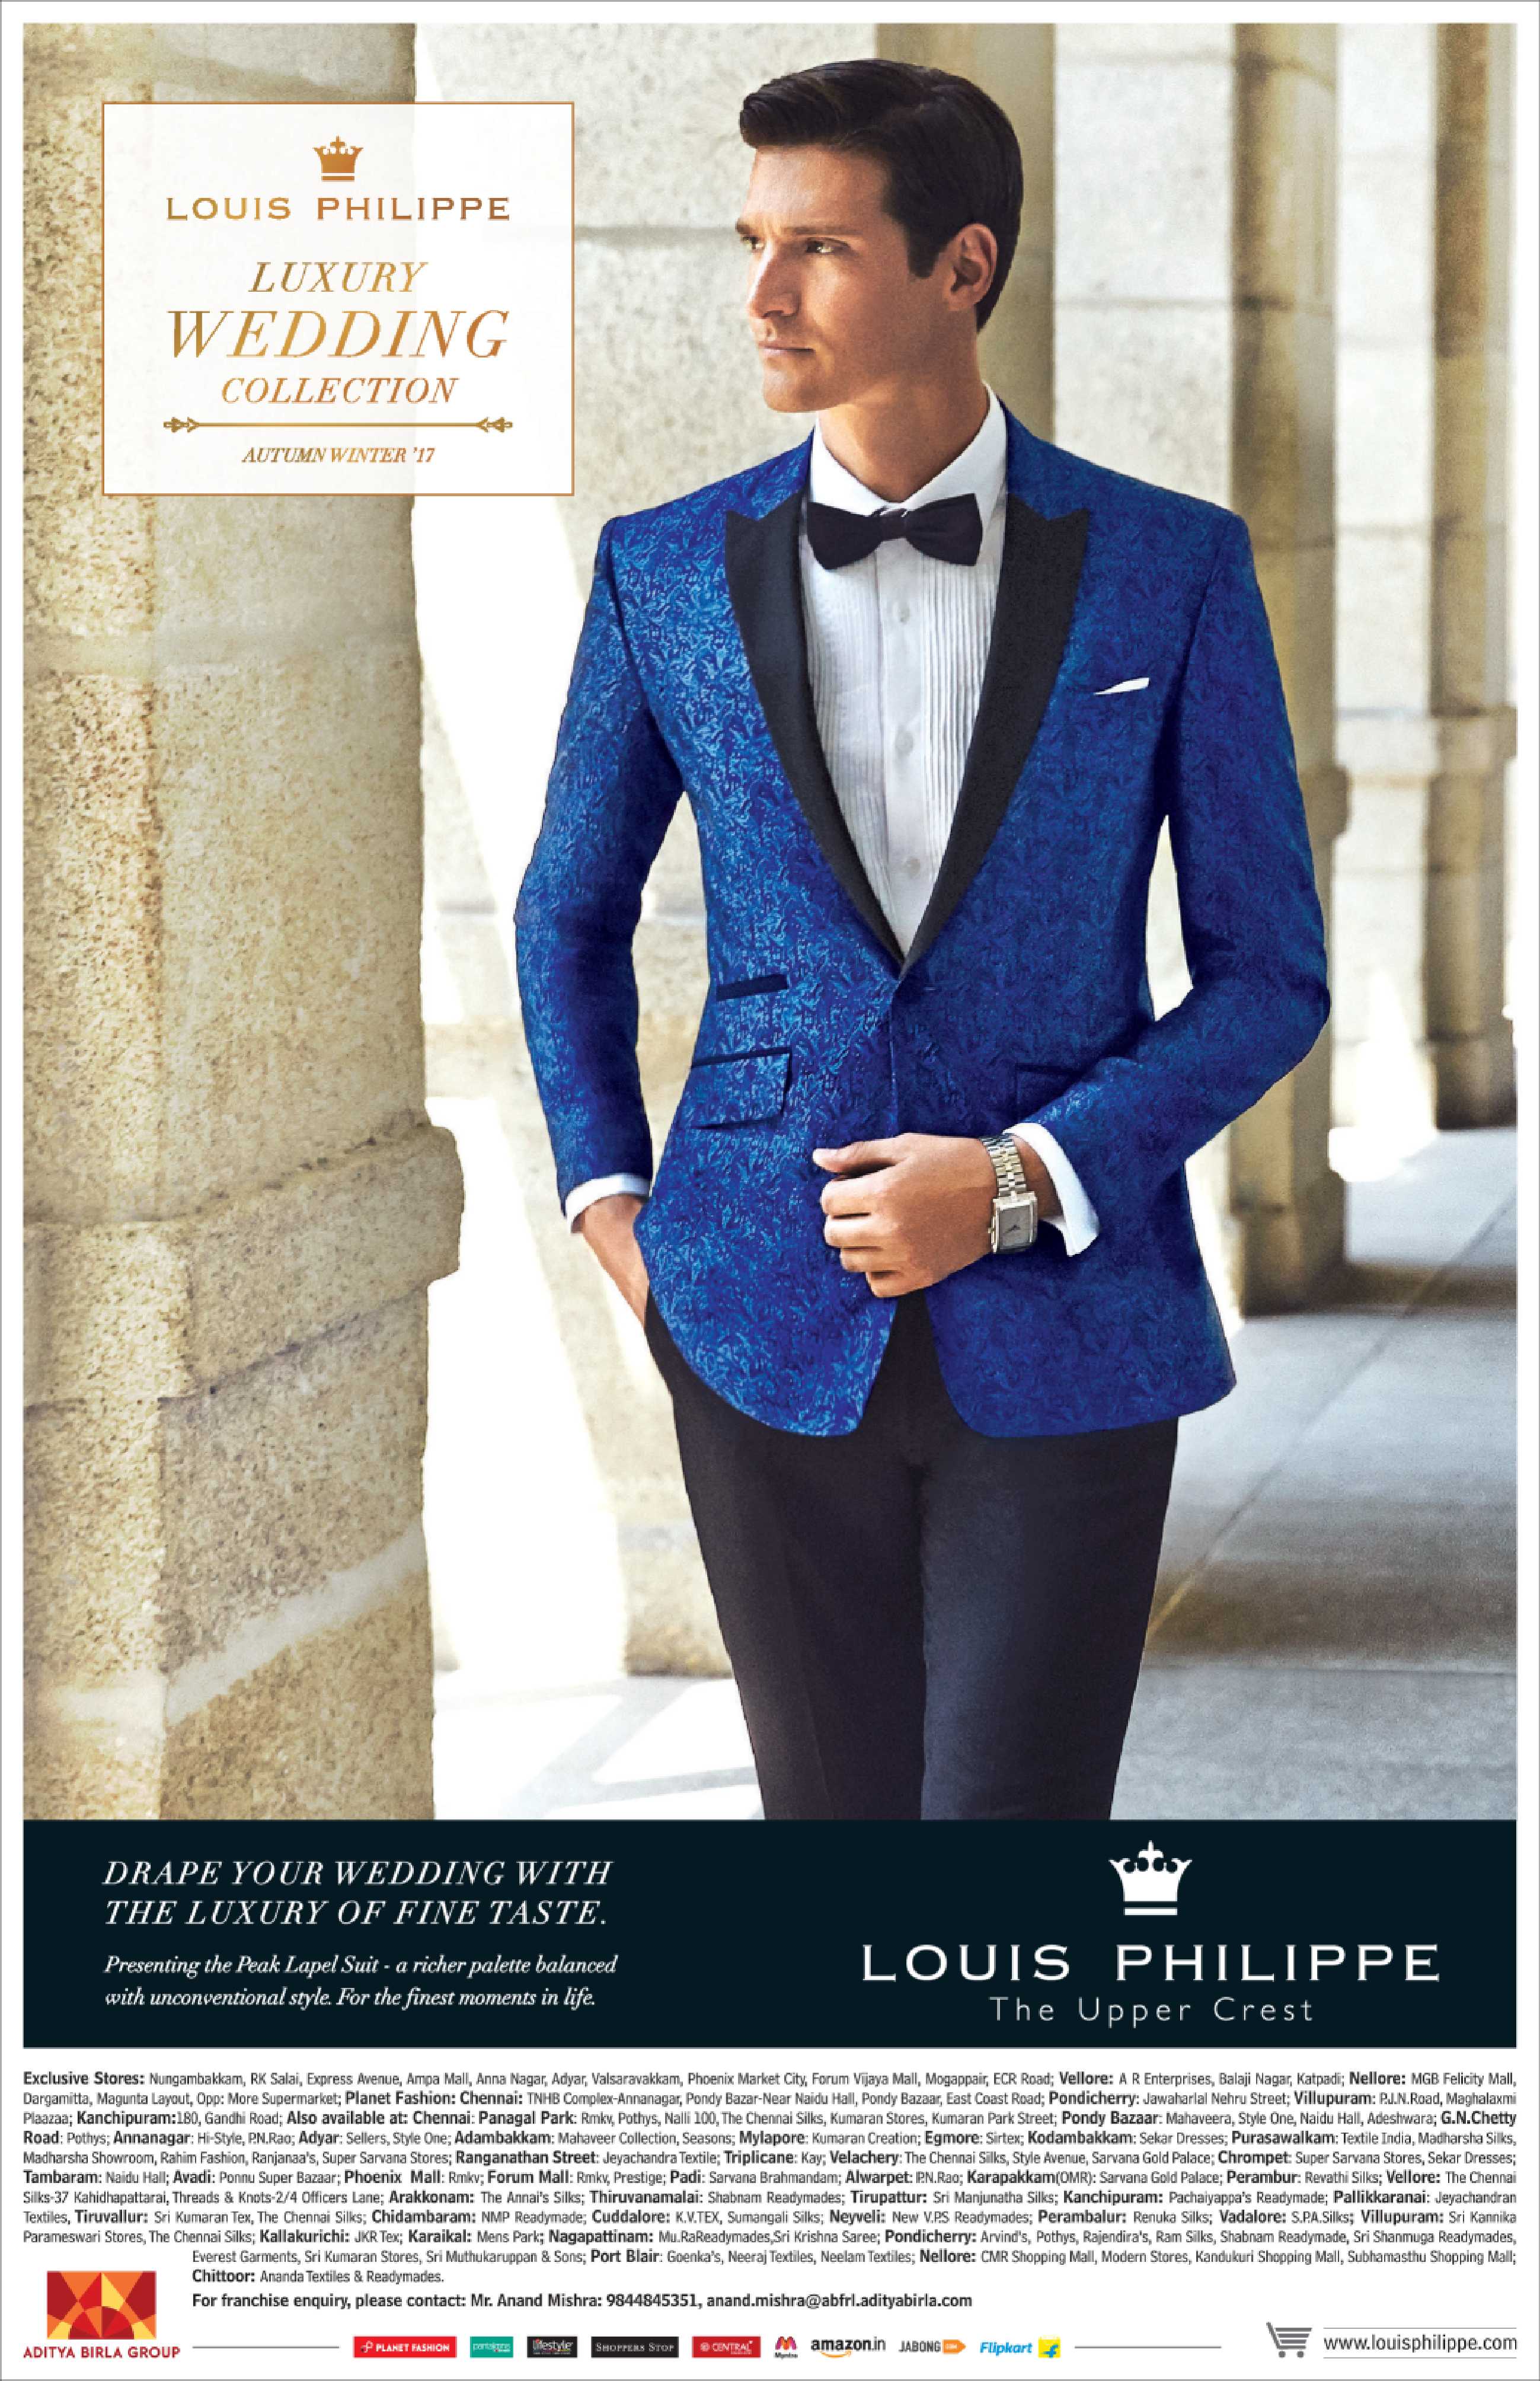 Ad Campaign: Louis Philippe unveils Permapress collection with new